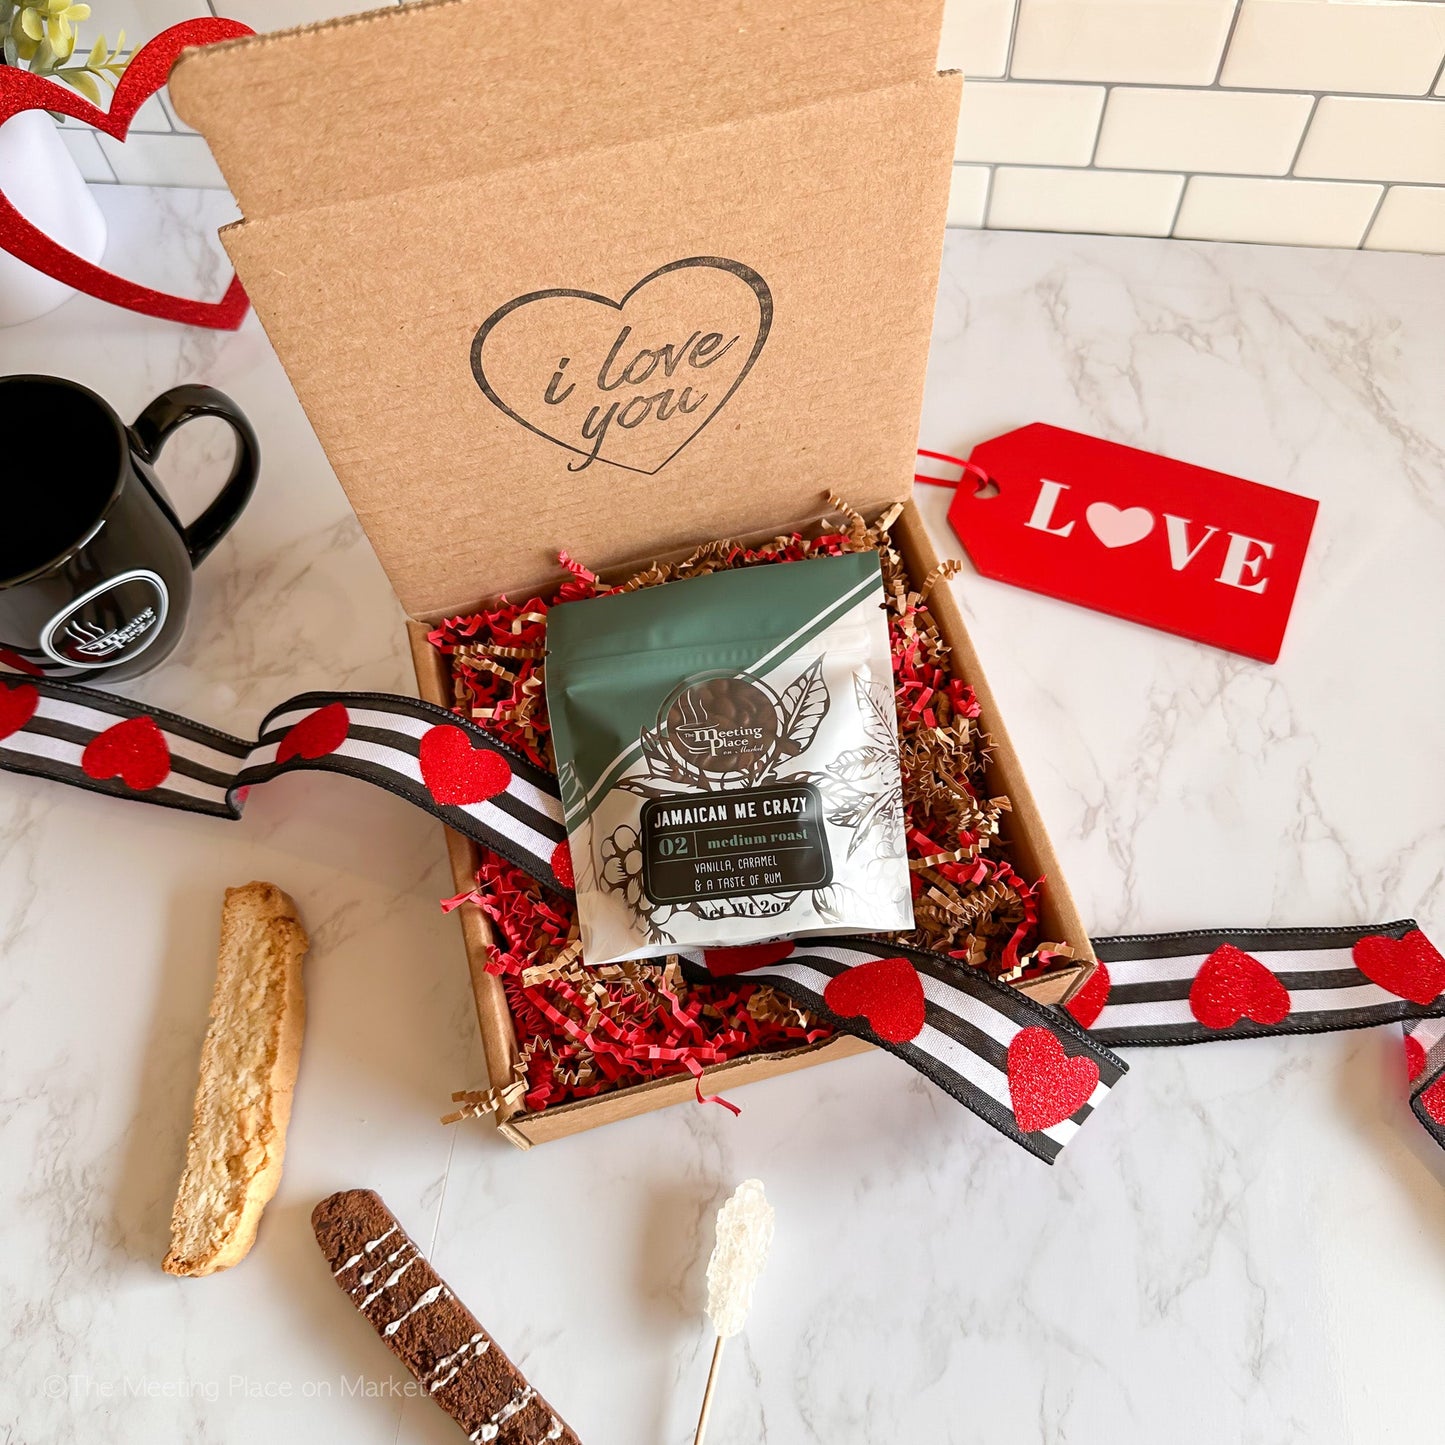 I Love You Coffee Gift - Say It With Coffee CoffeeMail Gift Box - The Meeting Place on Market